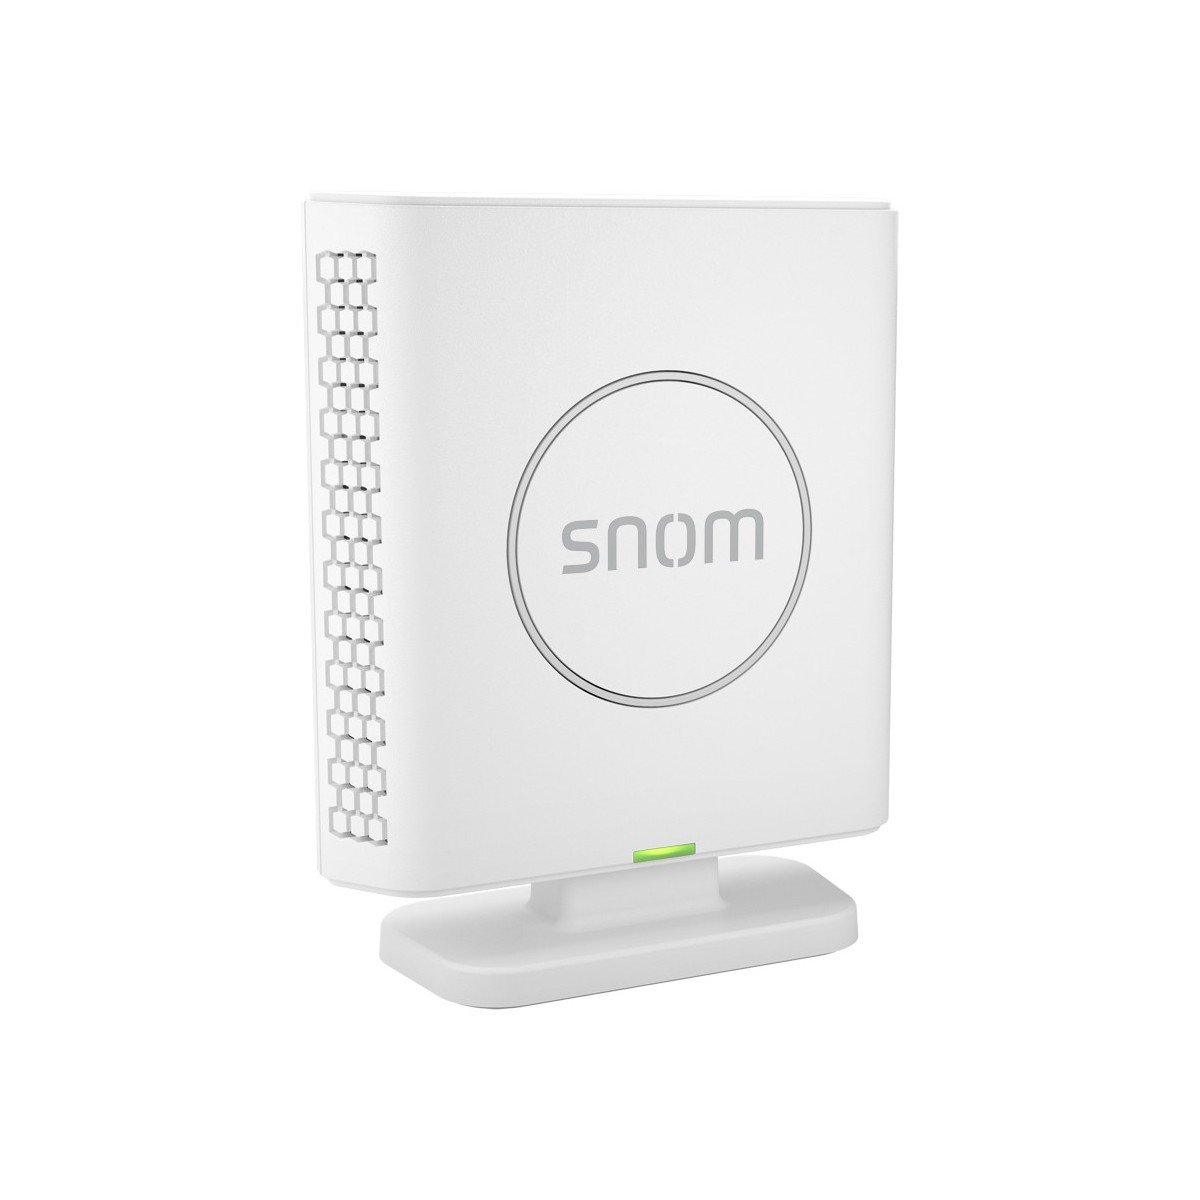 Snom M400 - 300 m - DHCP - NTP - LLDP-MED - HTTP - TLS - G.711 - G.711alaw - G.711ulaw - G.722 - G.726 - G.729 - 1880 - 1900 MHz